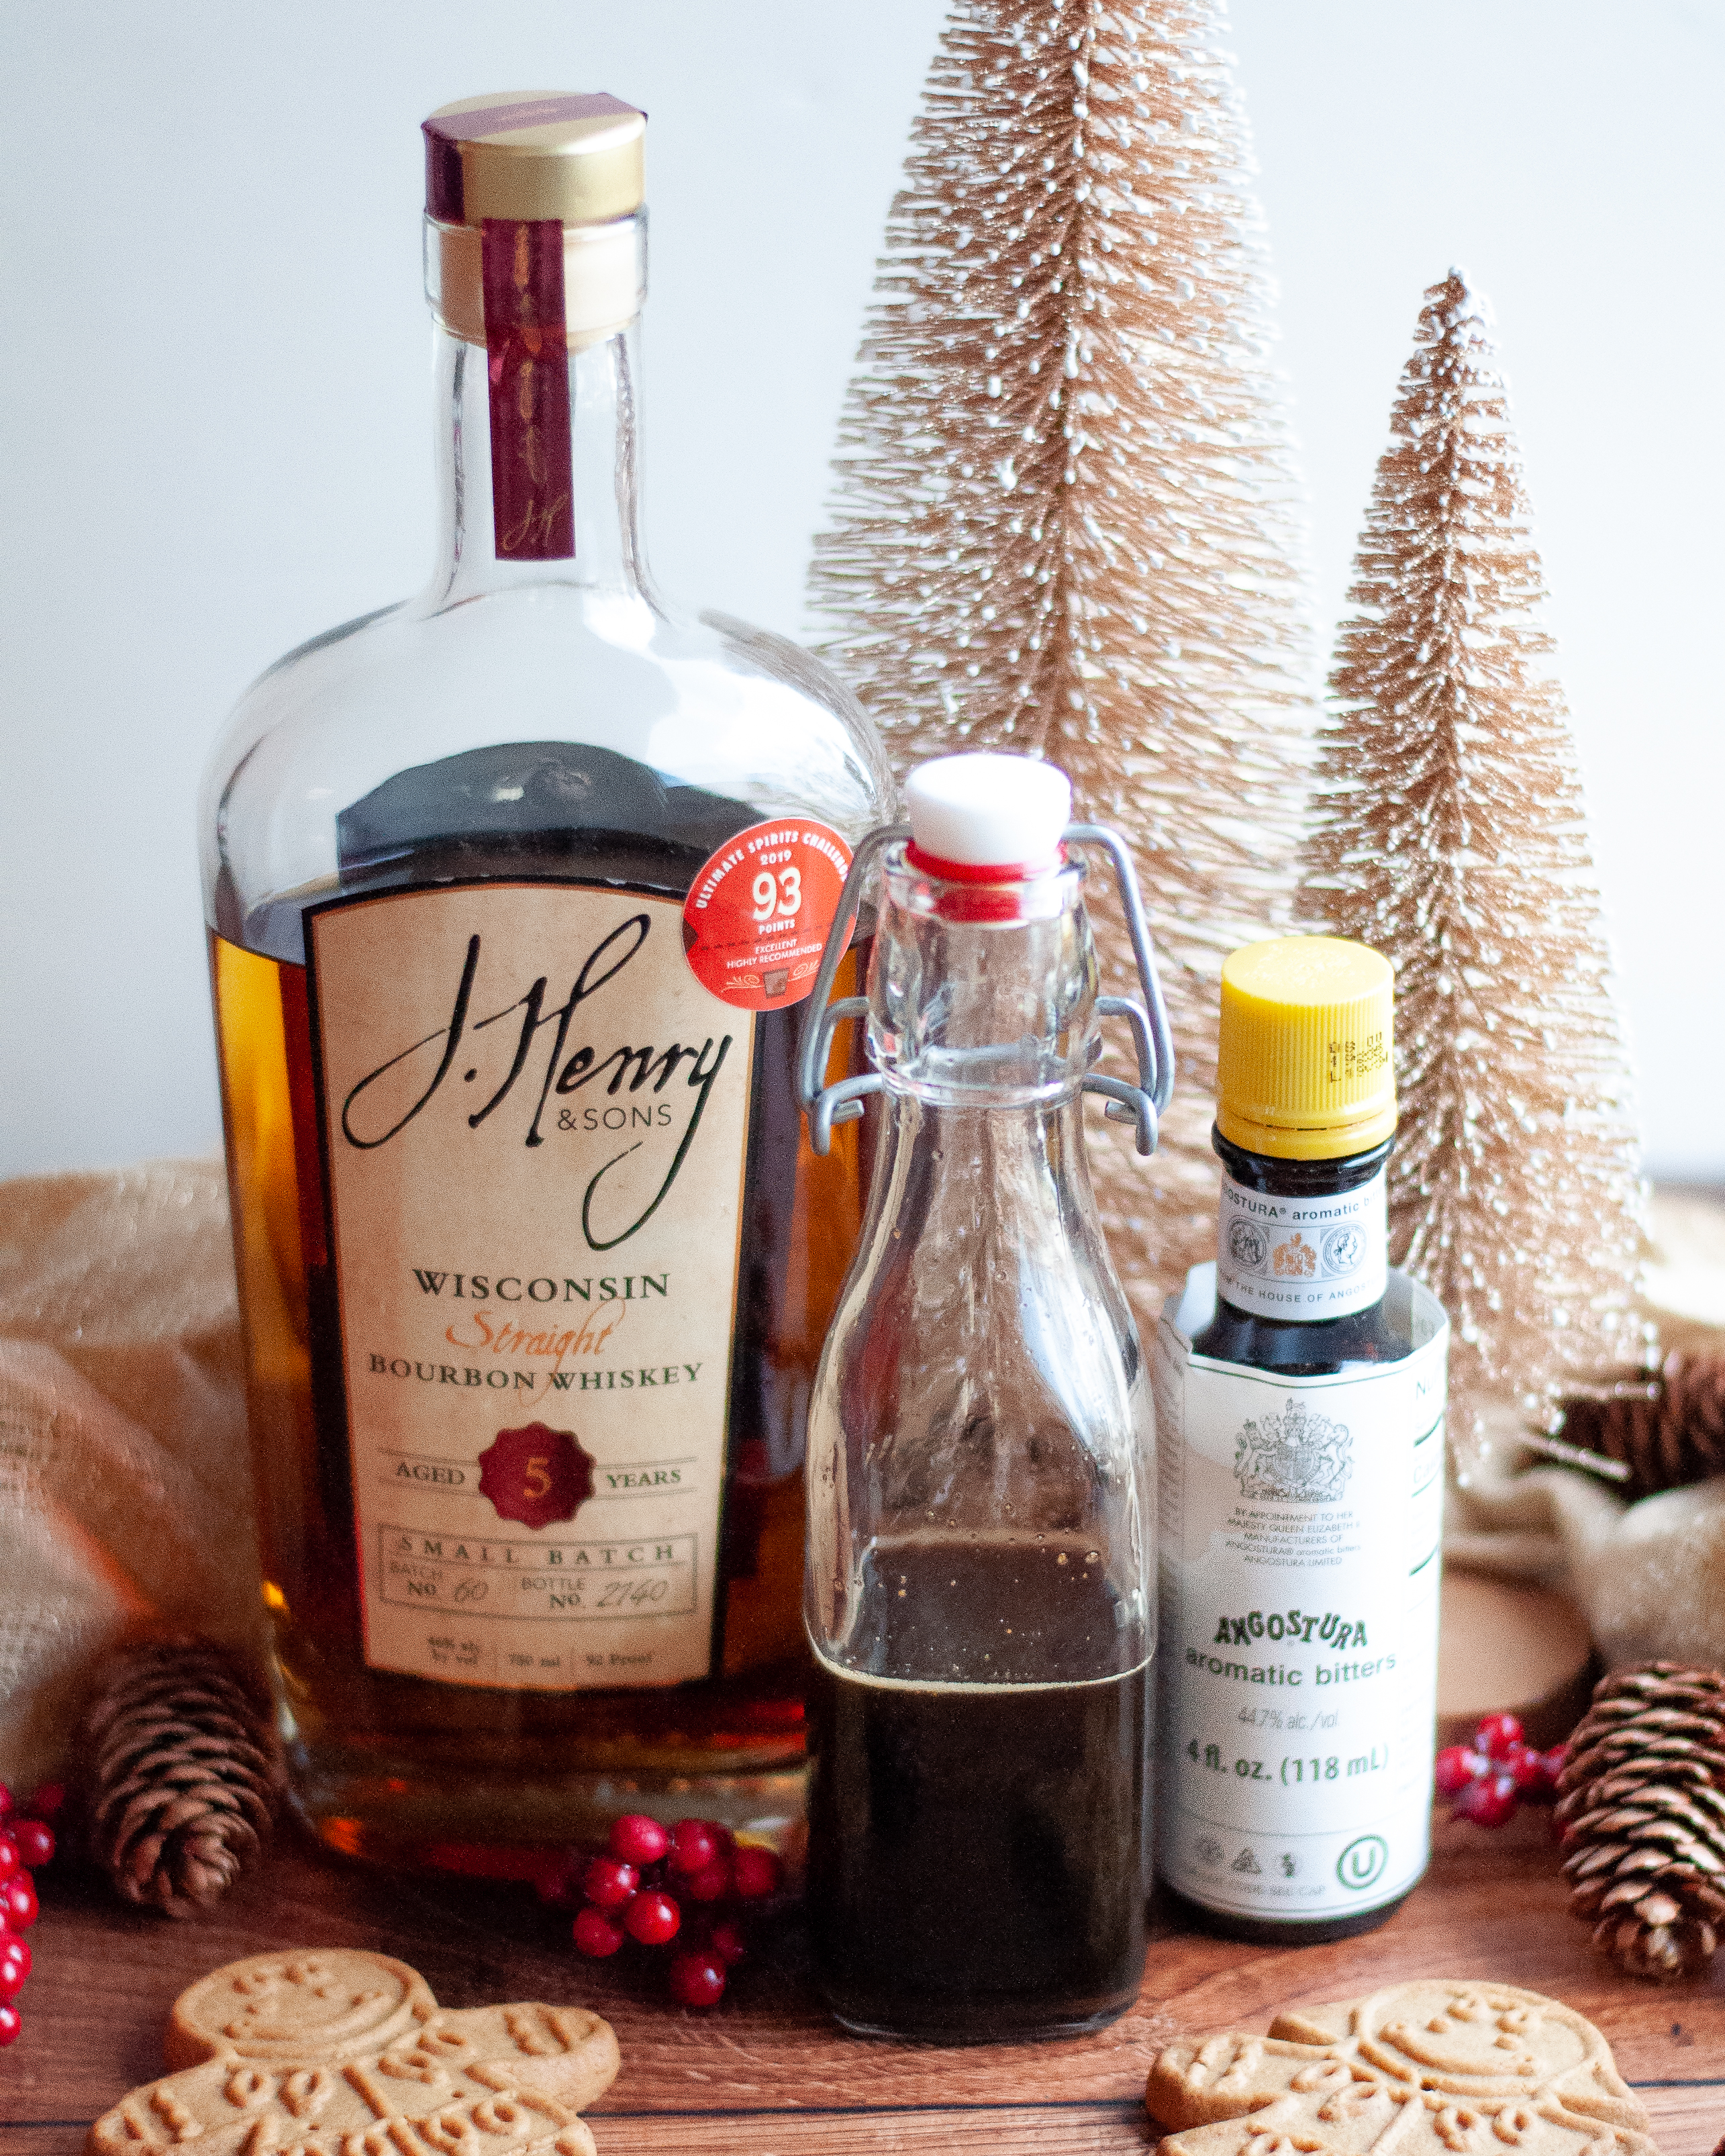 Ingredients for this old fashioned recipe, including bourbon, gingerbread simple syrup, and bitters.